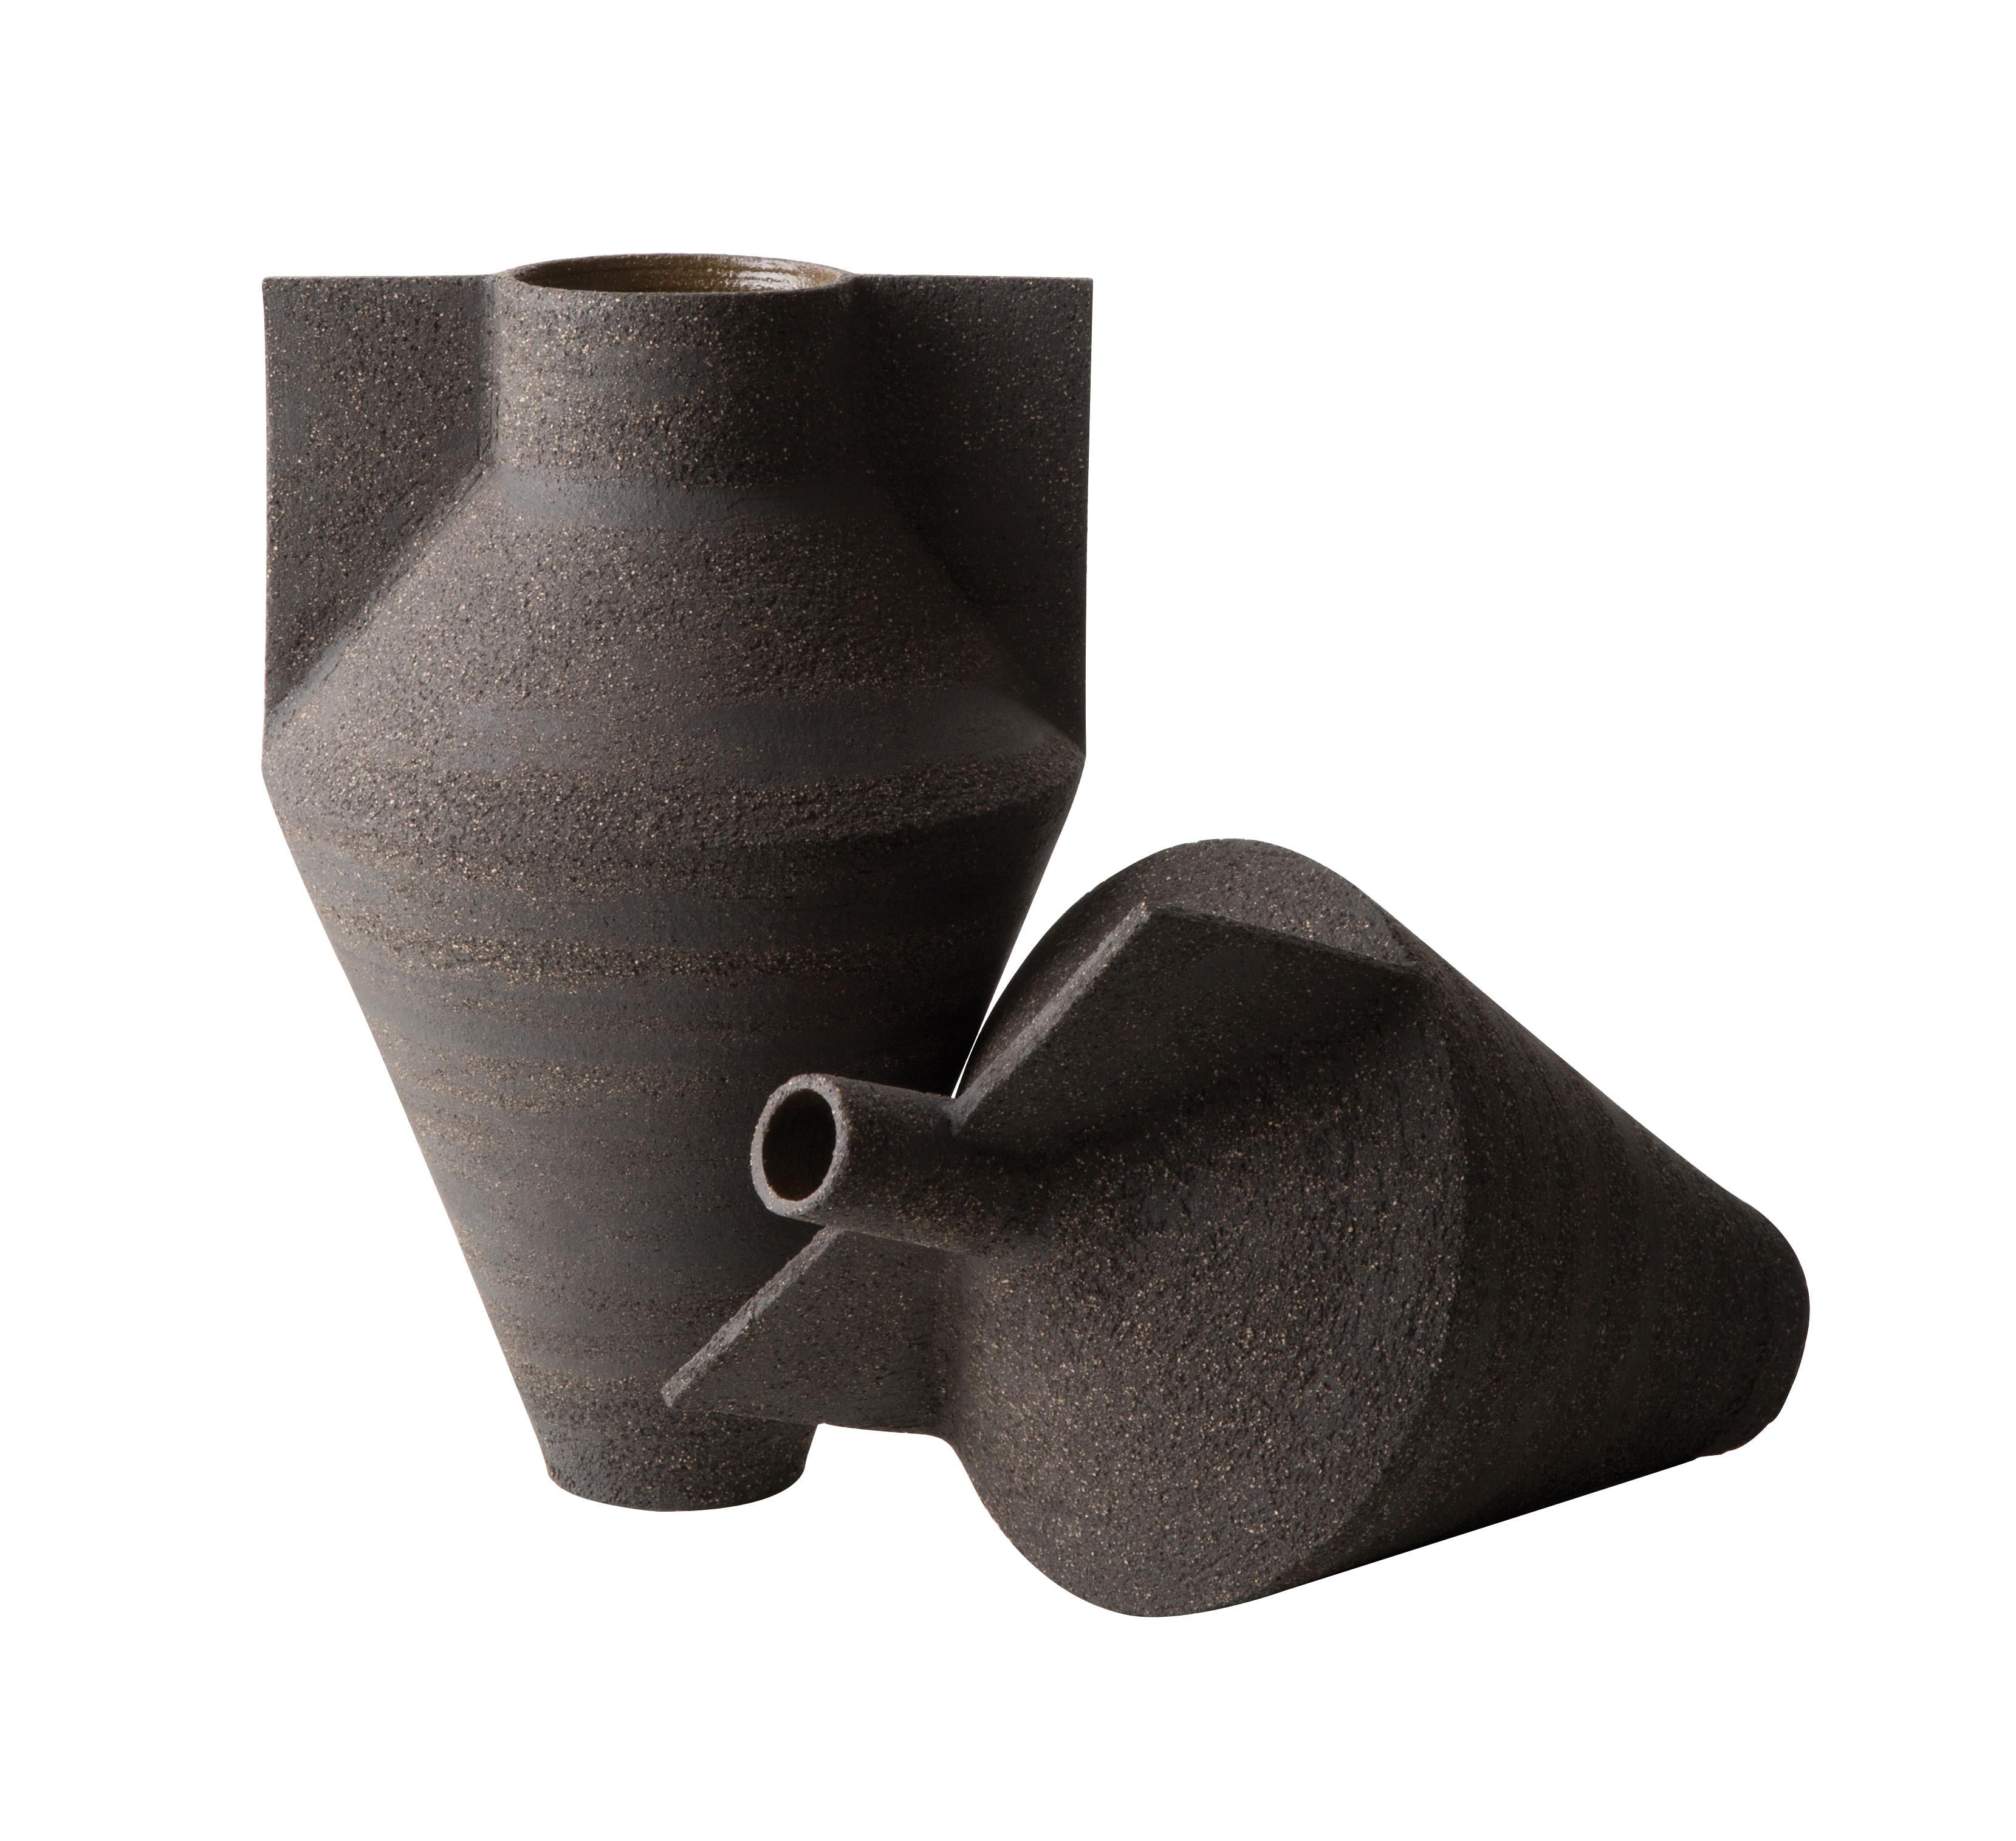 Denoted by clean lines and handcrafted, the Jana vases are a collection that was designed for Cappellini by Antonio Forteleoni. These vases are made of black earth, forged by hand on a pottery wheel, and available in two different shapes and